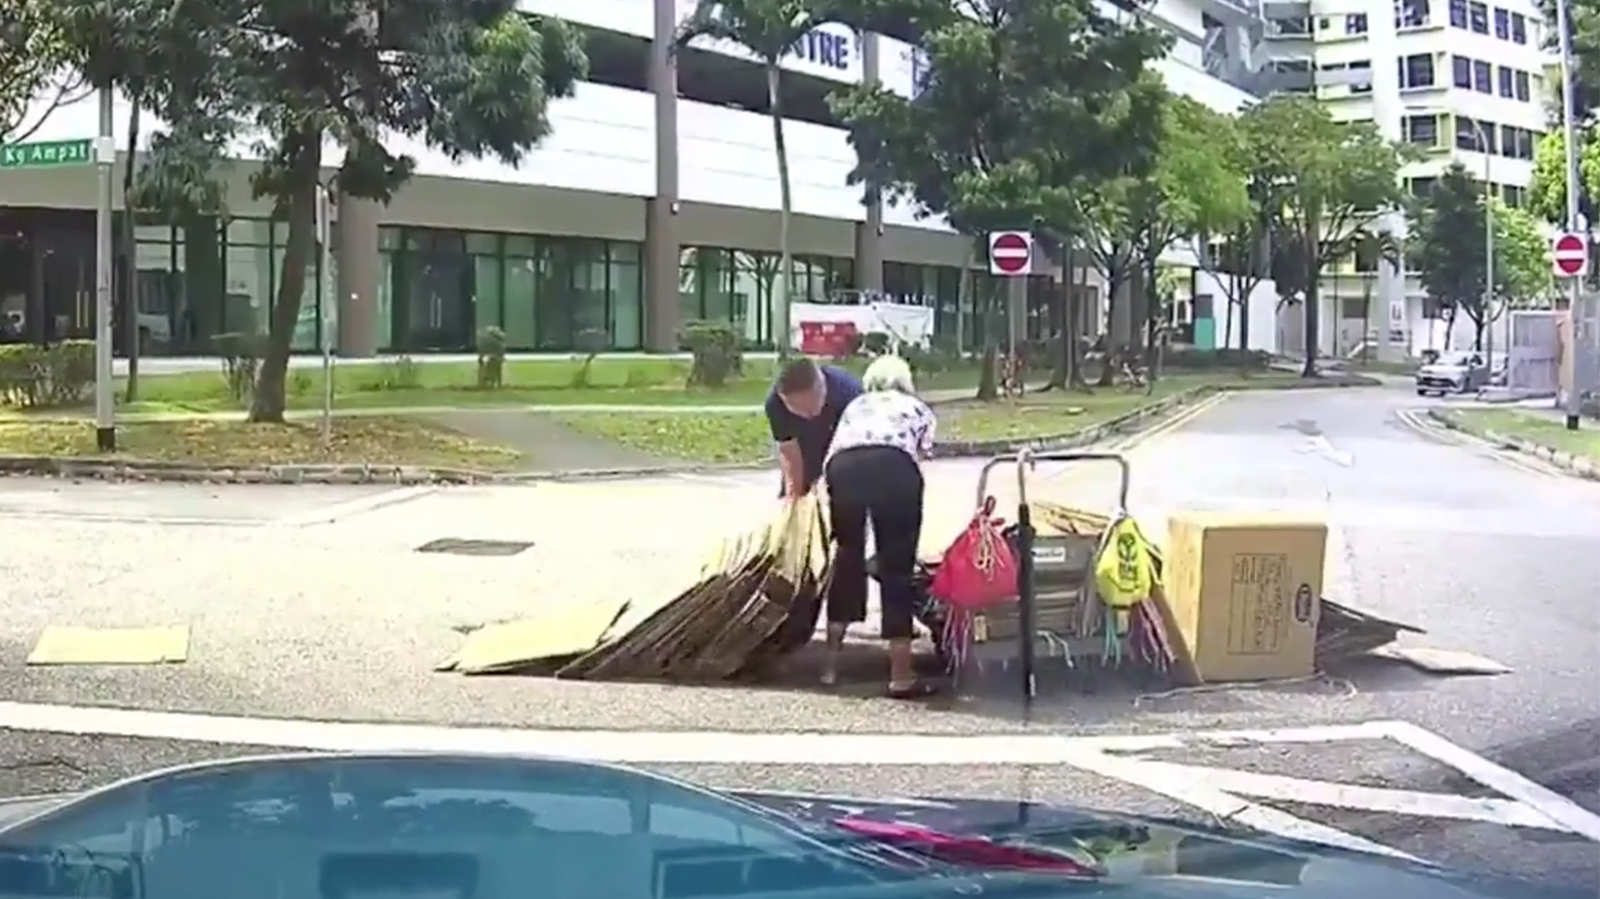 He stops in the middle of the road to help a cardboard auntie in distress